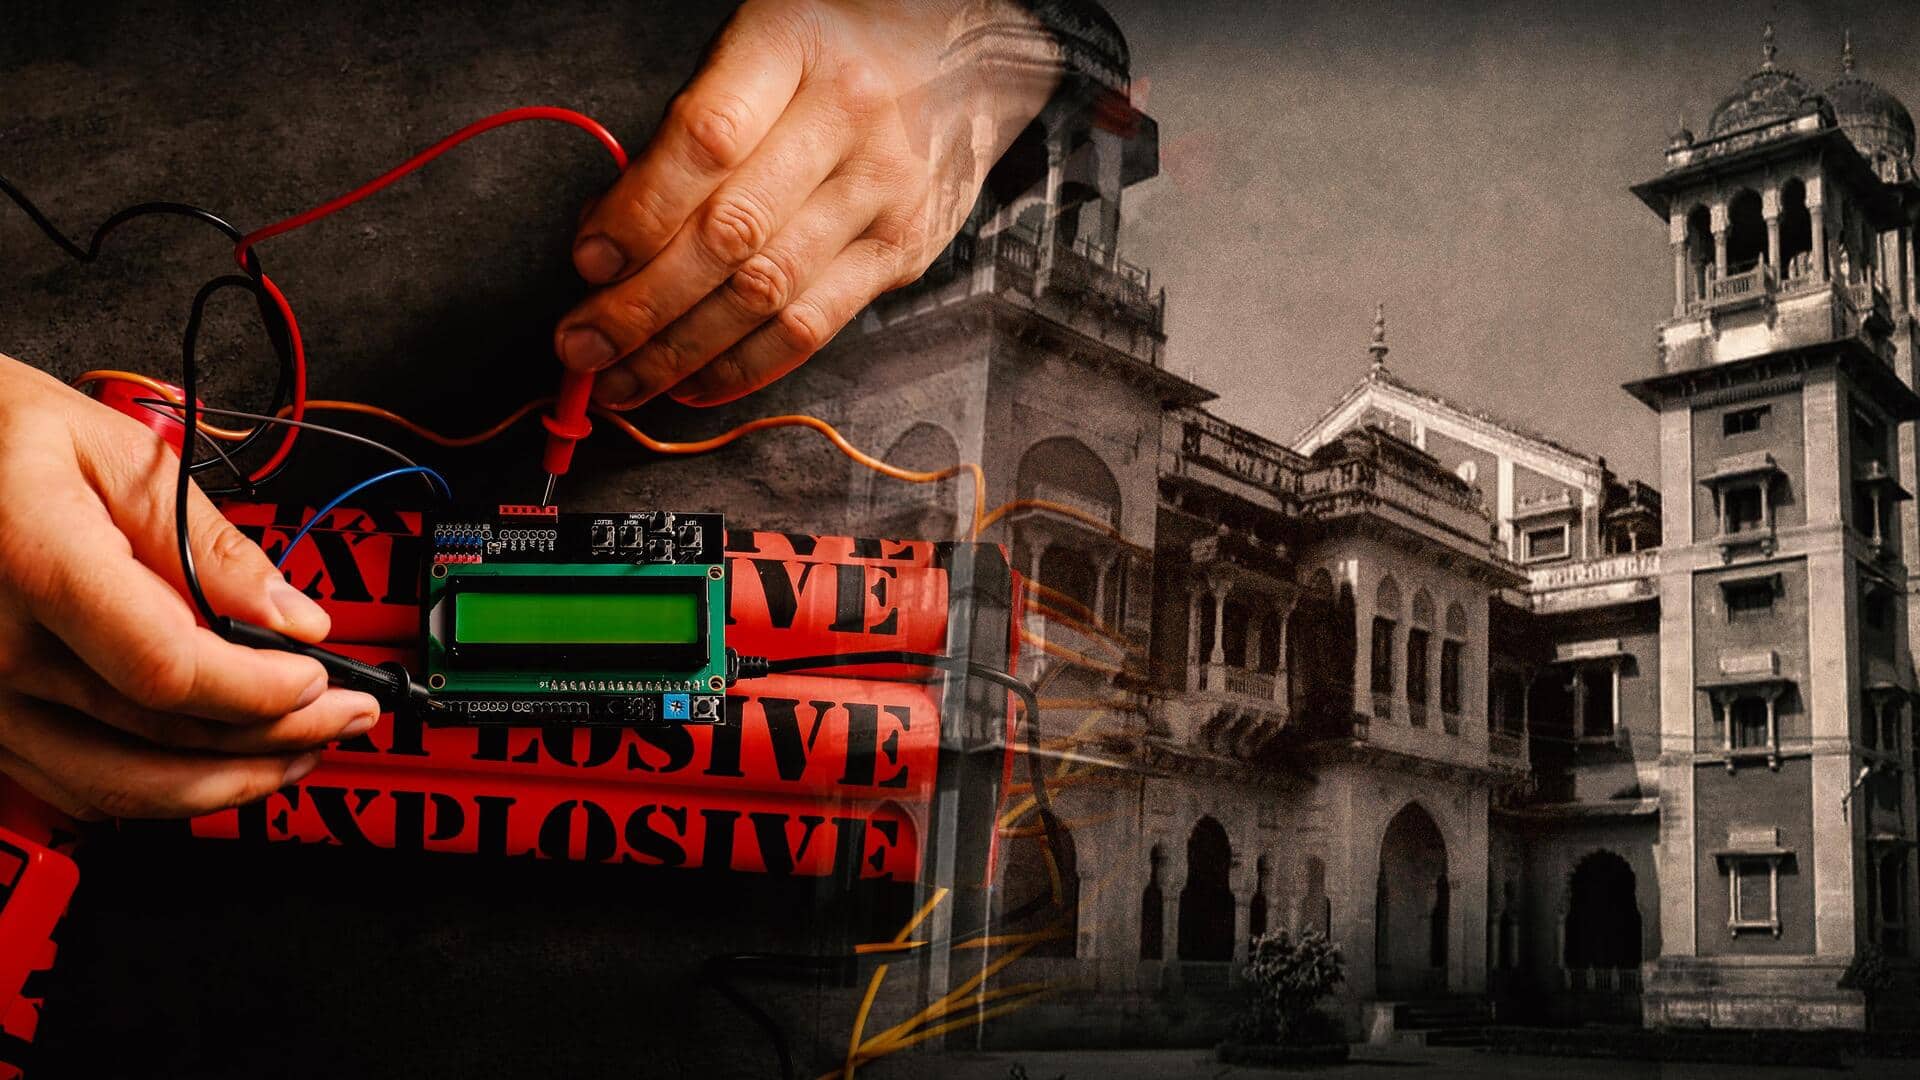 Allahabad University student injured while making bomb in hostel